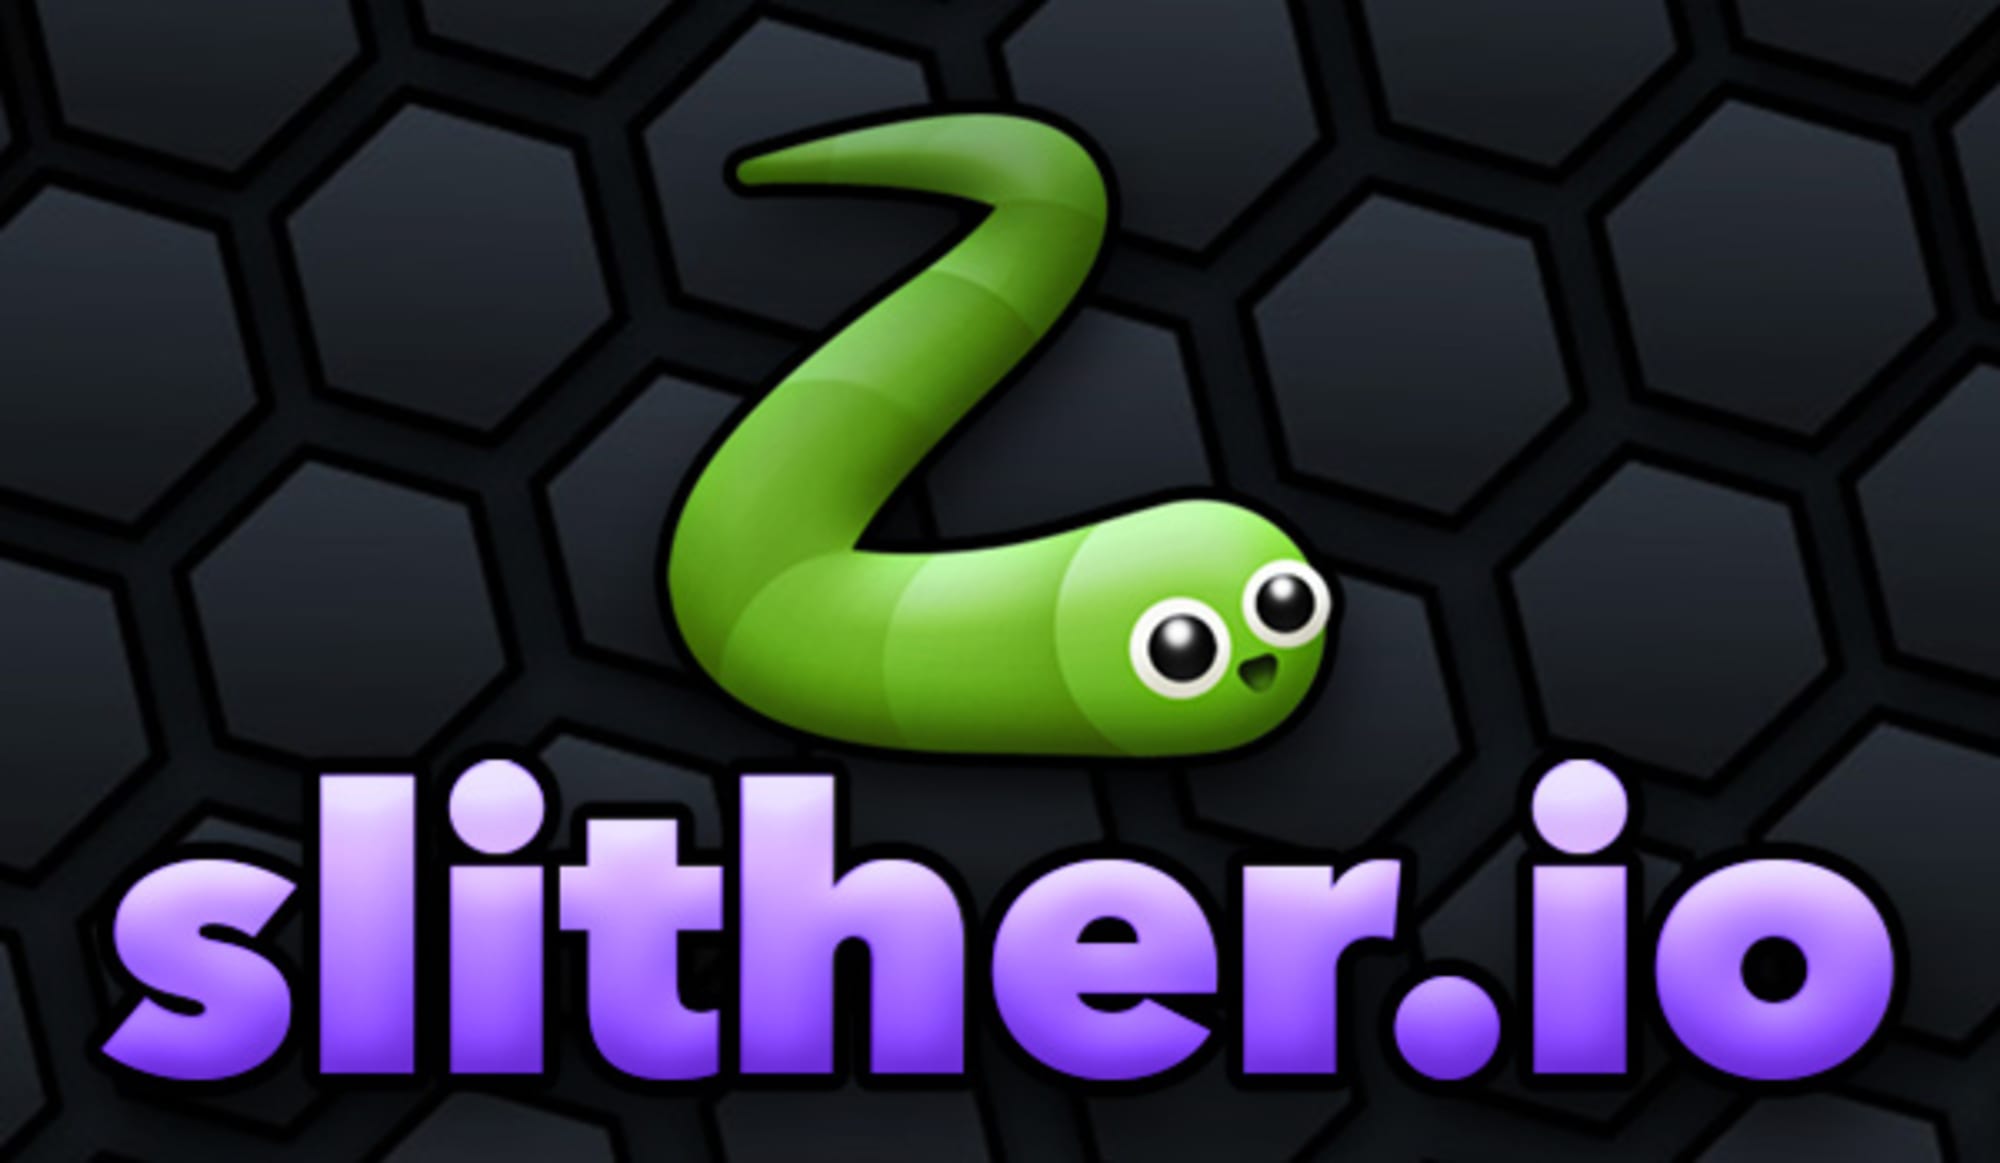 Little Big Snake (.io) APK + Mod for Android.